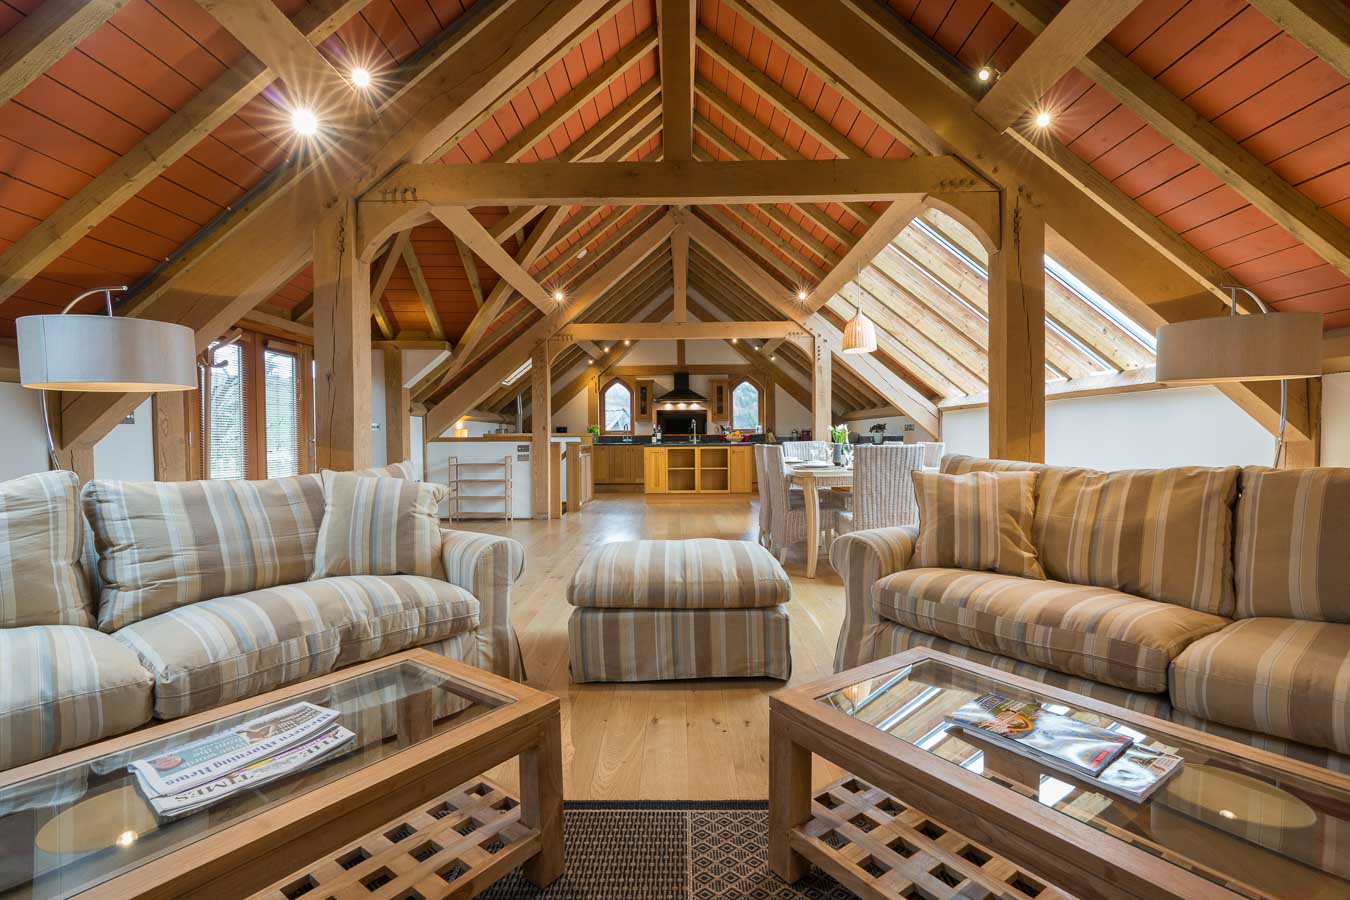 Orchard Lodge is a large luxury 5 star gold holiday cottage that sleeps 6. Offering you all the space you could need with its huge, beautiful open plan Oak living area.